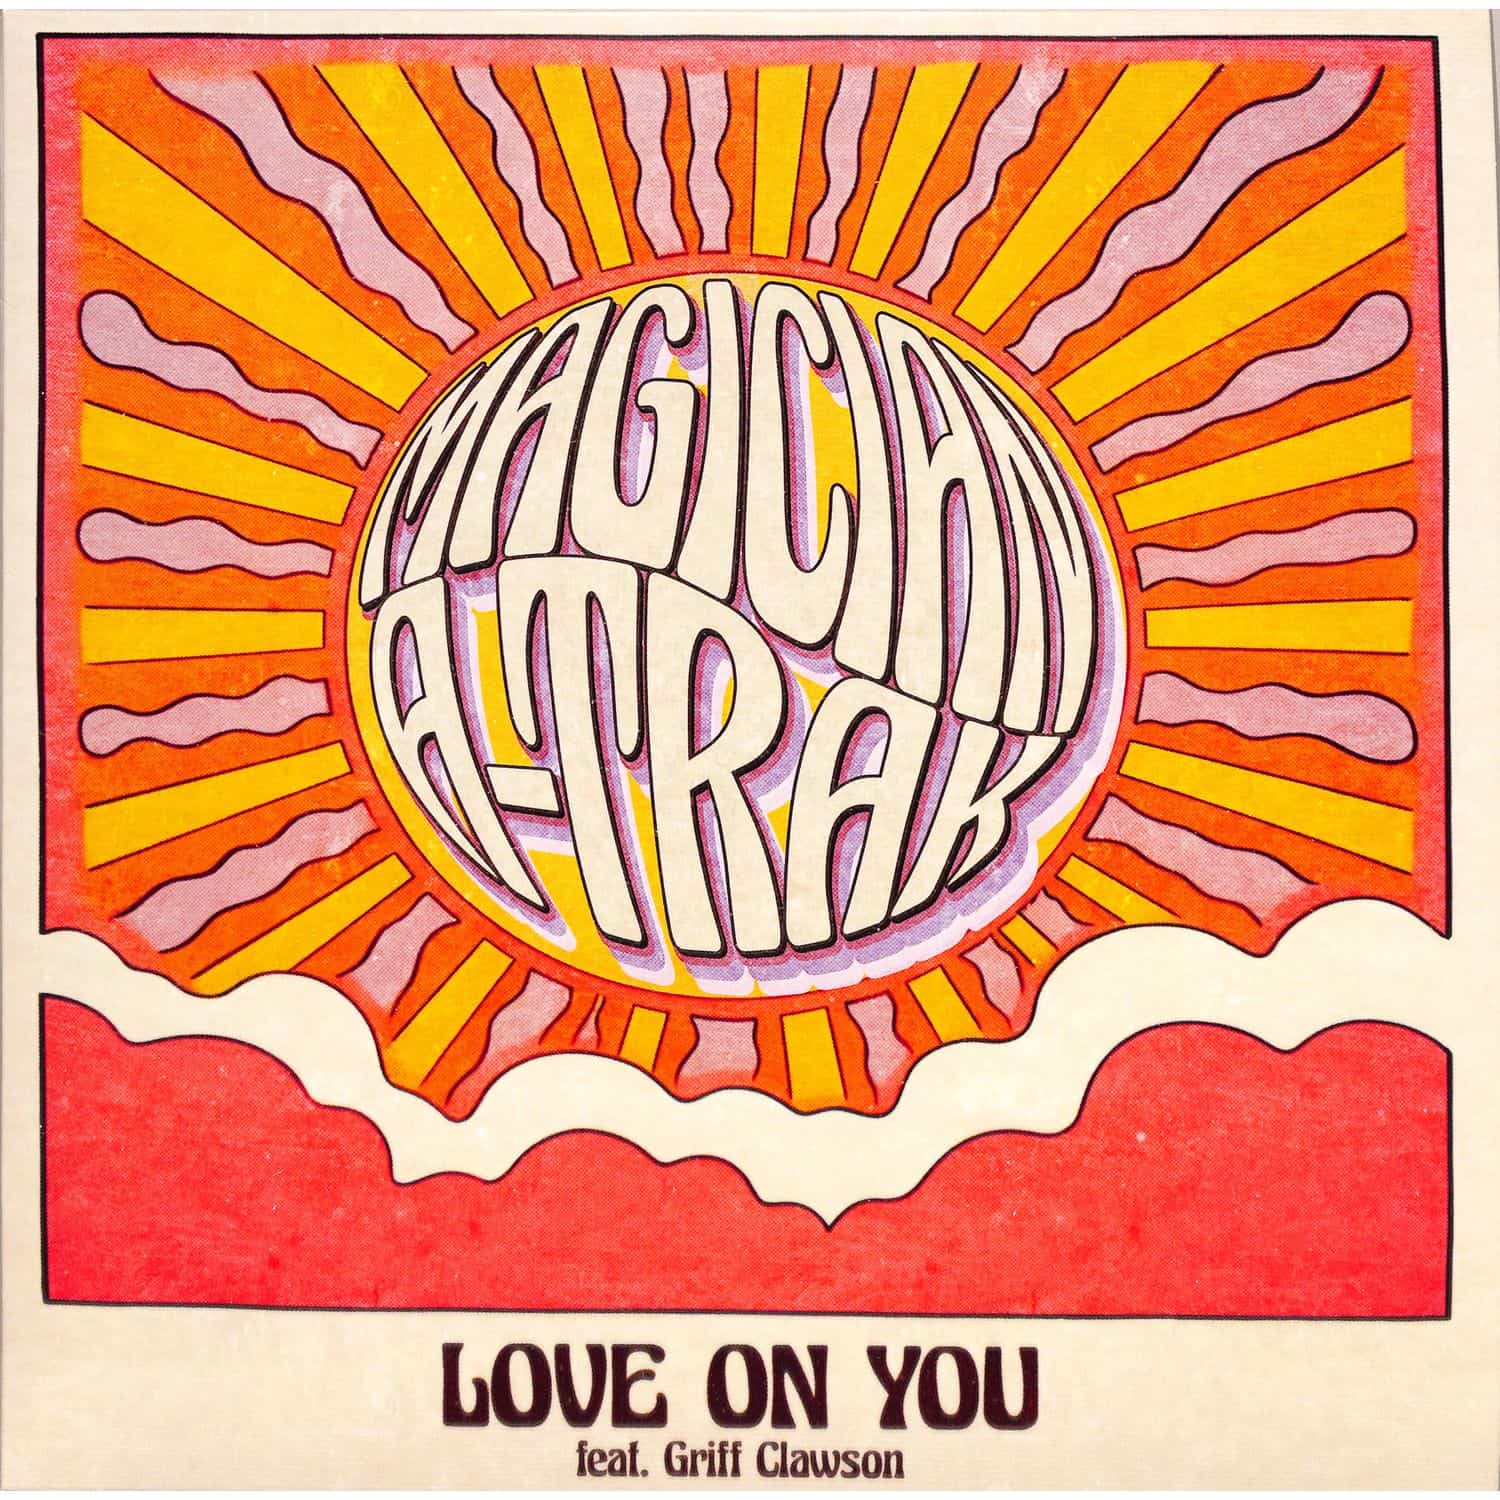 The Magician & A-Trak Featuring Griff Clawson - LOVE ON YOU 